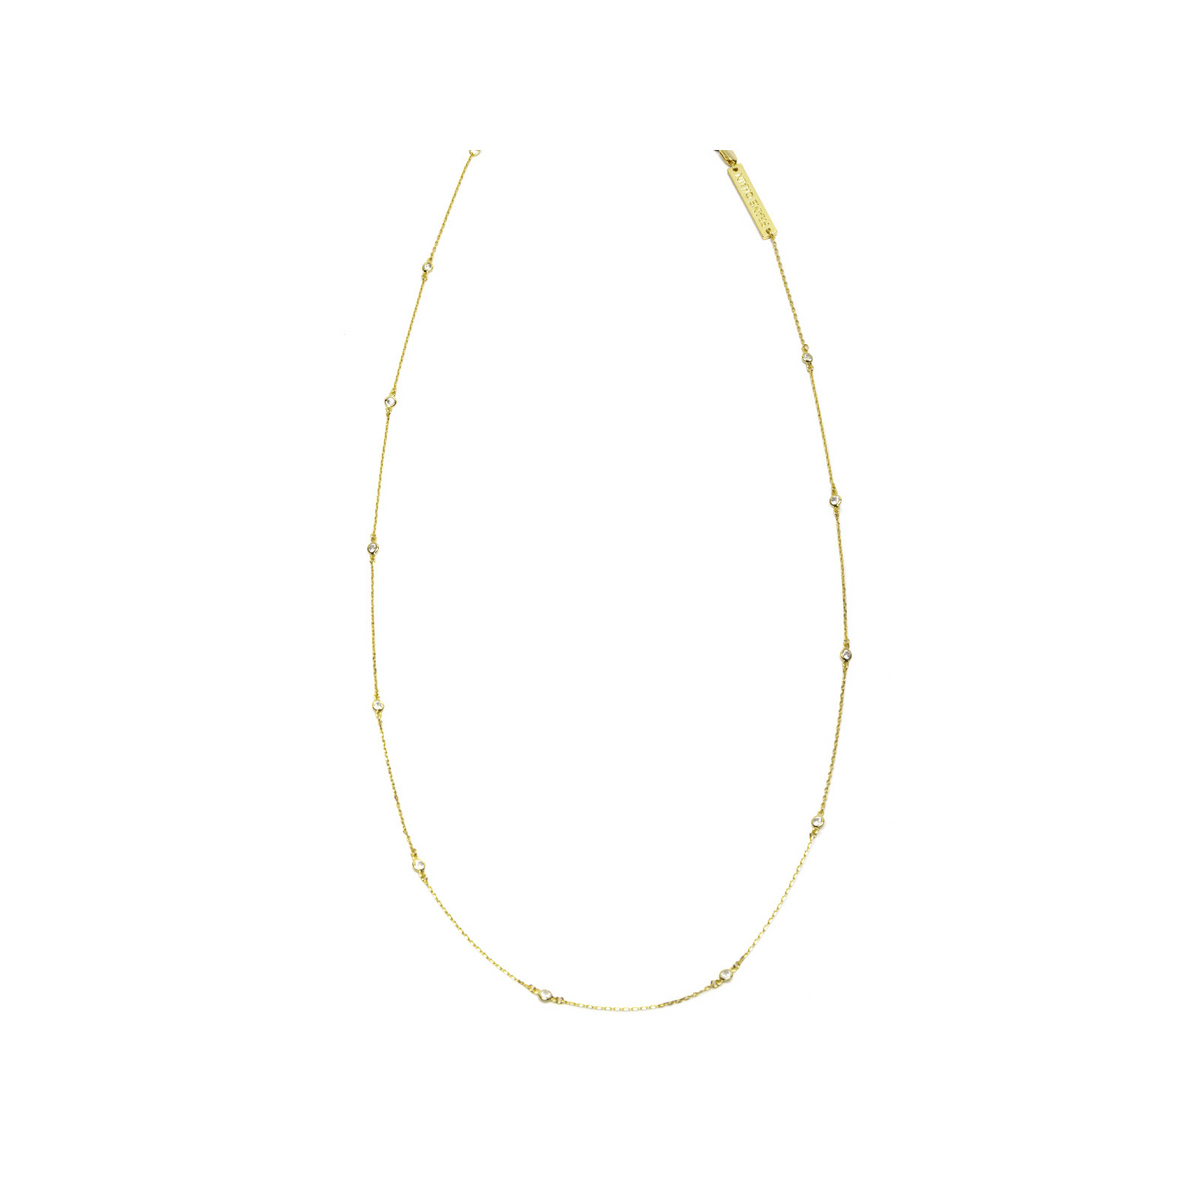 Frame Chain® Accessories: Shine Bright color Yellow Gold - three-quarters view.